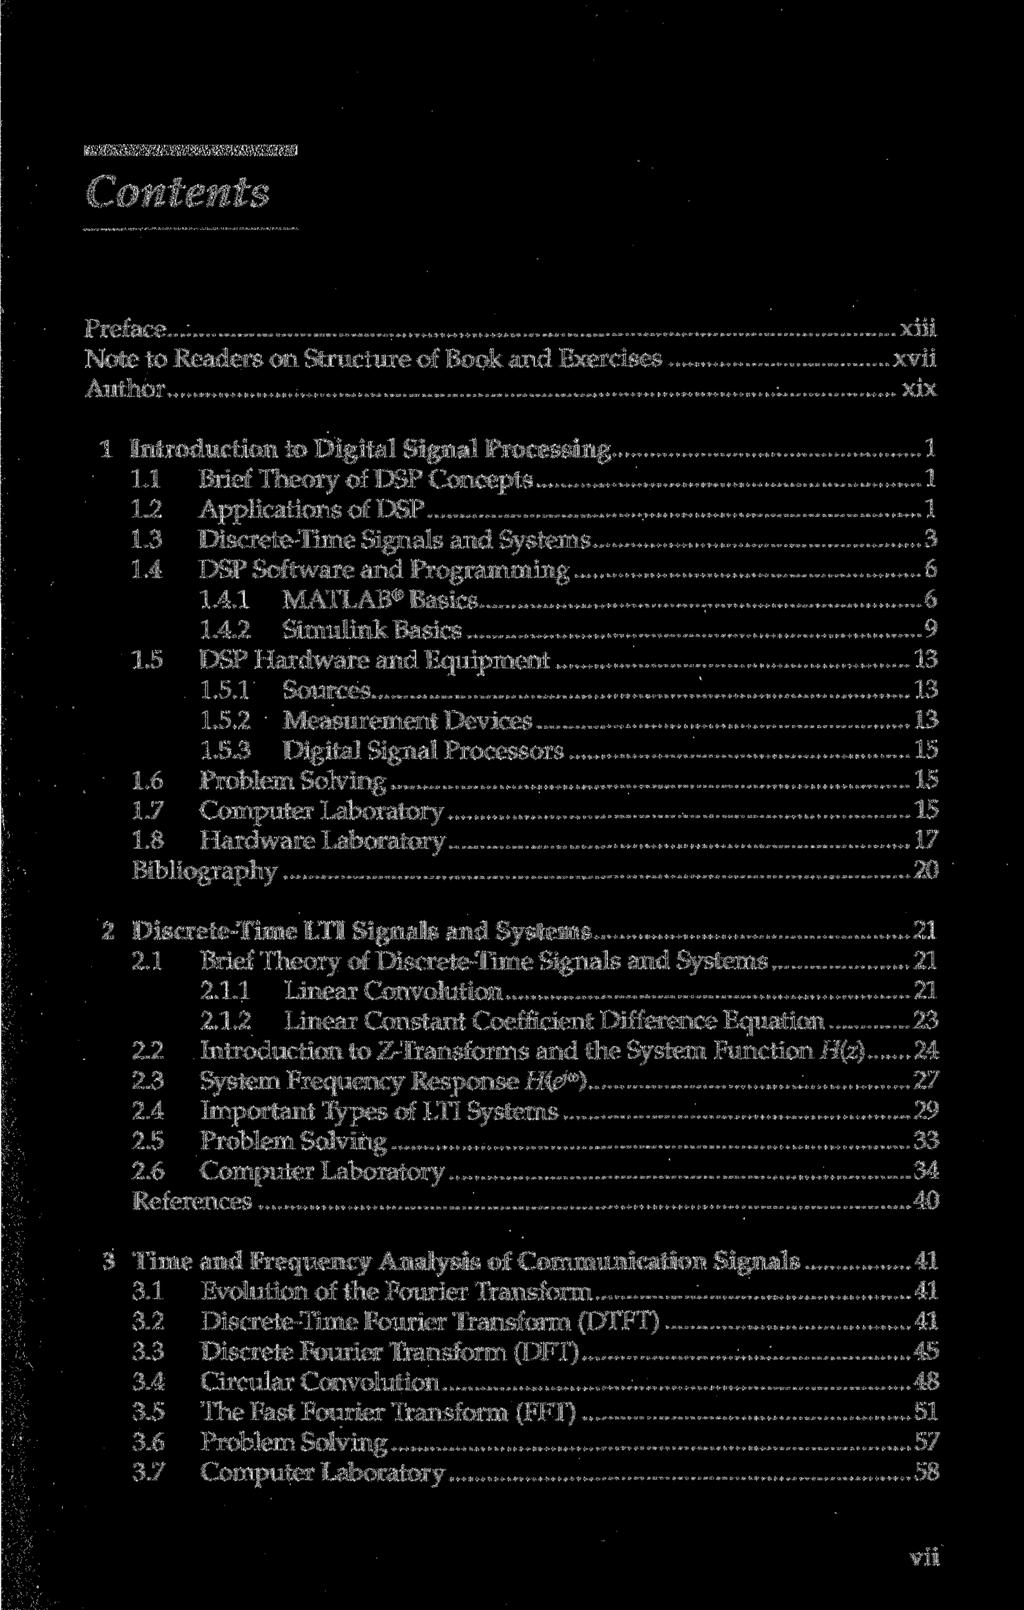 Contents Preface Note to Readers on Structure of Book and Exercises Author xiii xvii xix 1 Introduction to Digital Signal Processing 1 1.1 Brief Theory of DSP Concepts 1 1.2 Applications of DSP 1 1.